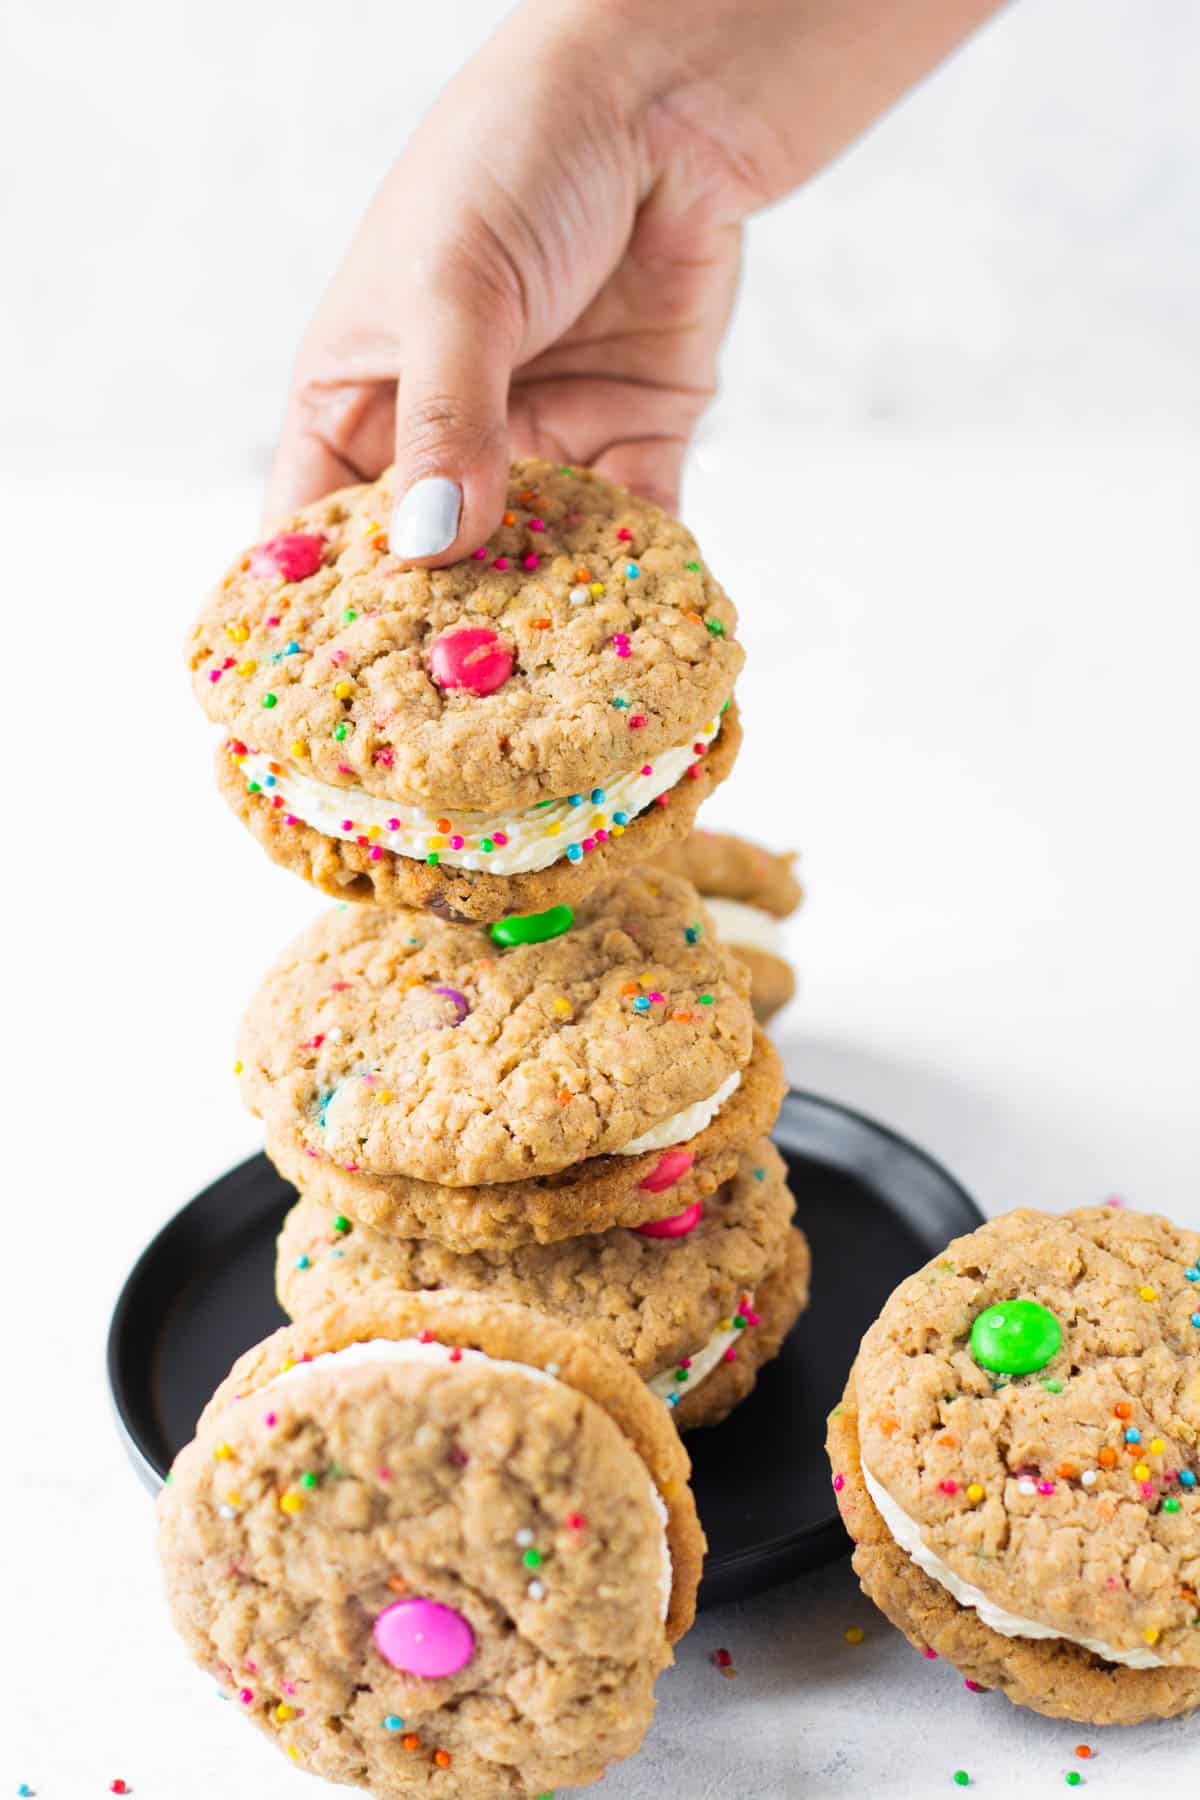 hand grabbing a thick oatmeal whoopie pie monster cookie full of sprinkles and m&m's